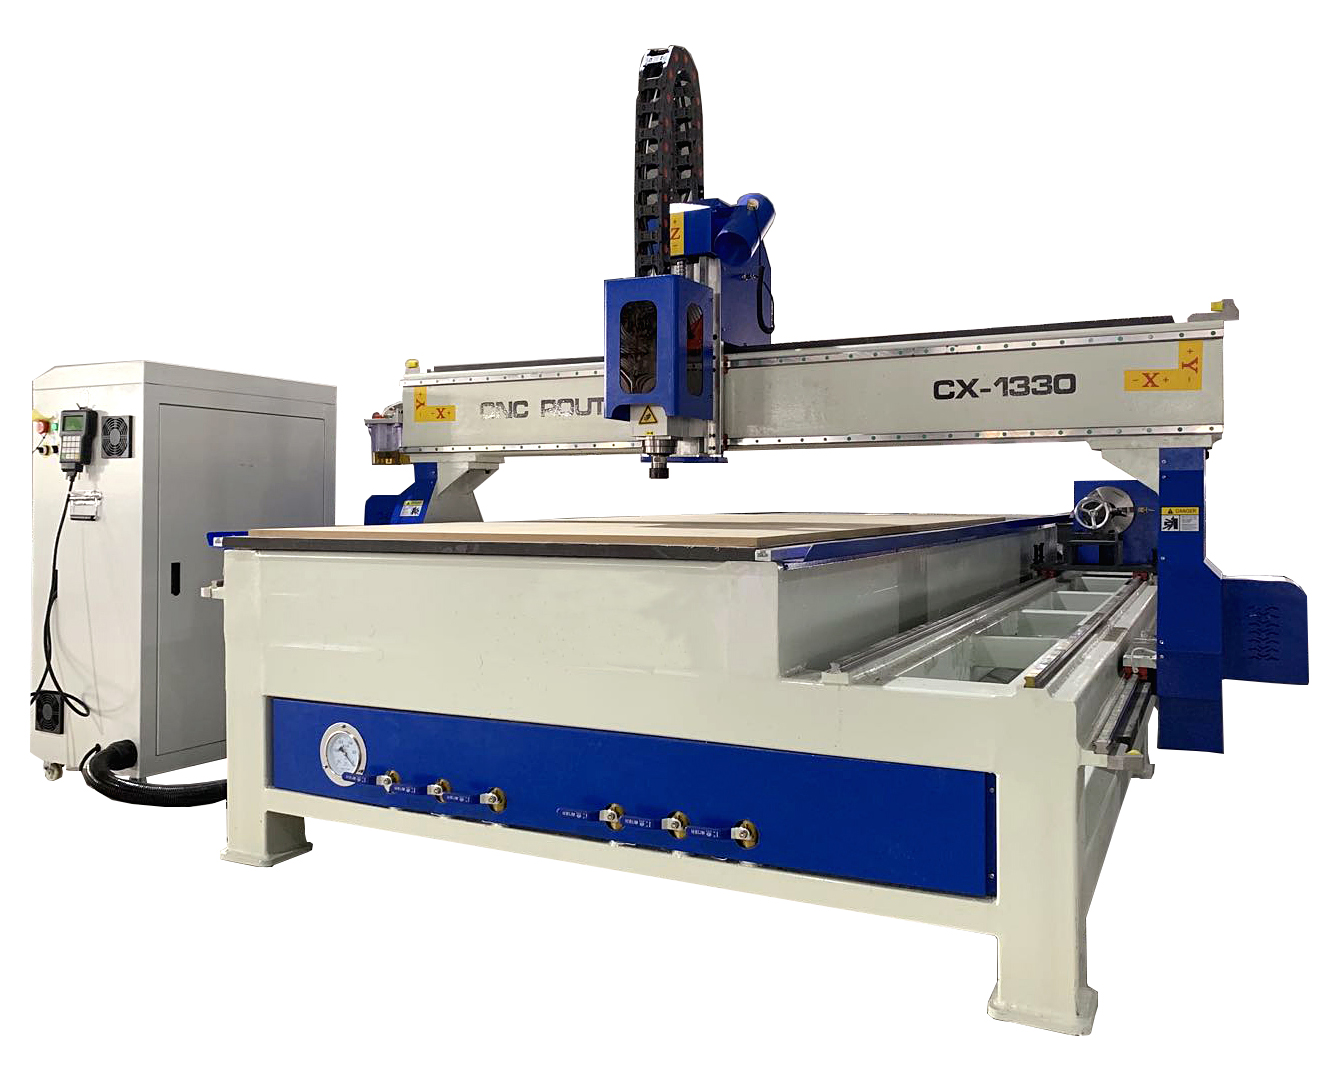 Superstar CNC CX - 1330 Woodworking Cylindrical CNC Router Machine